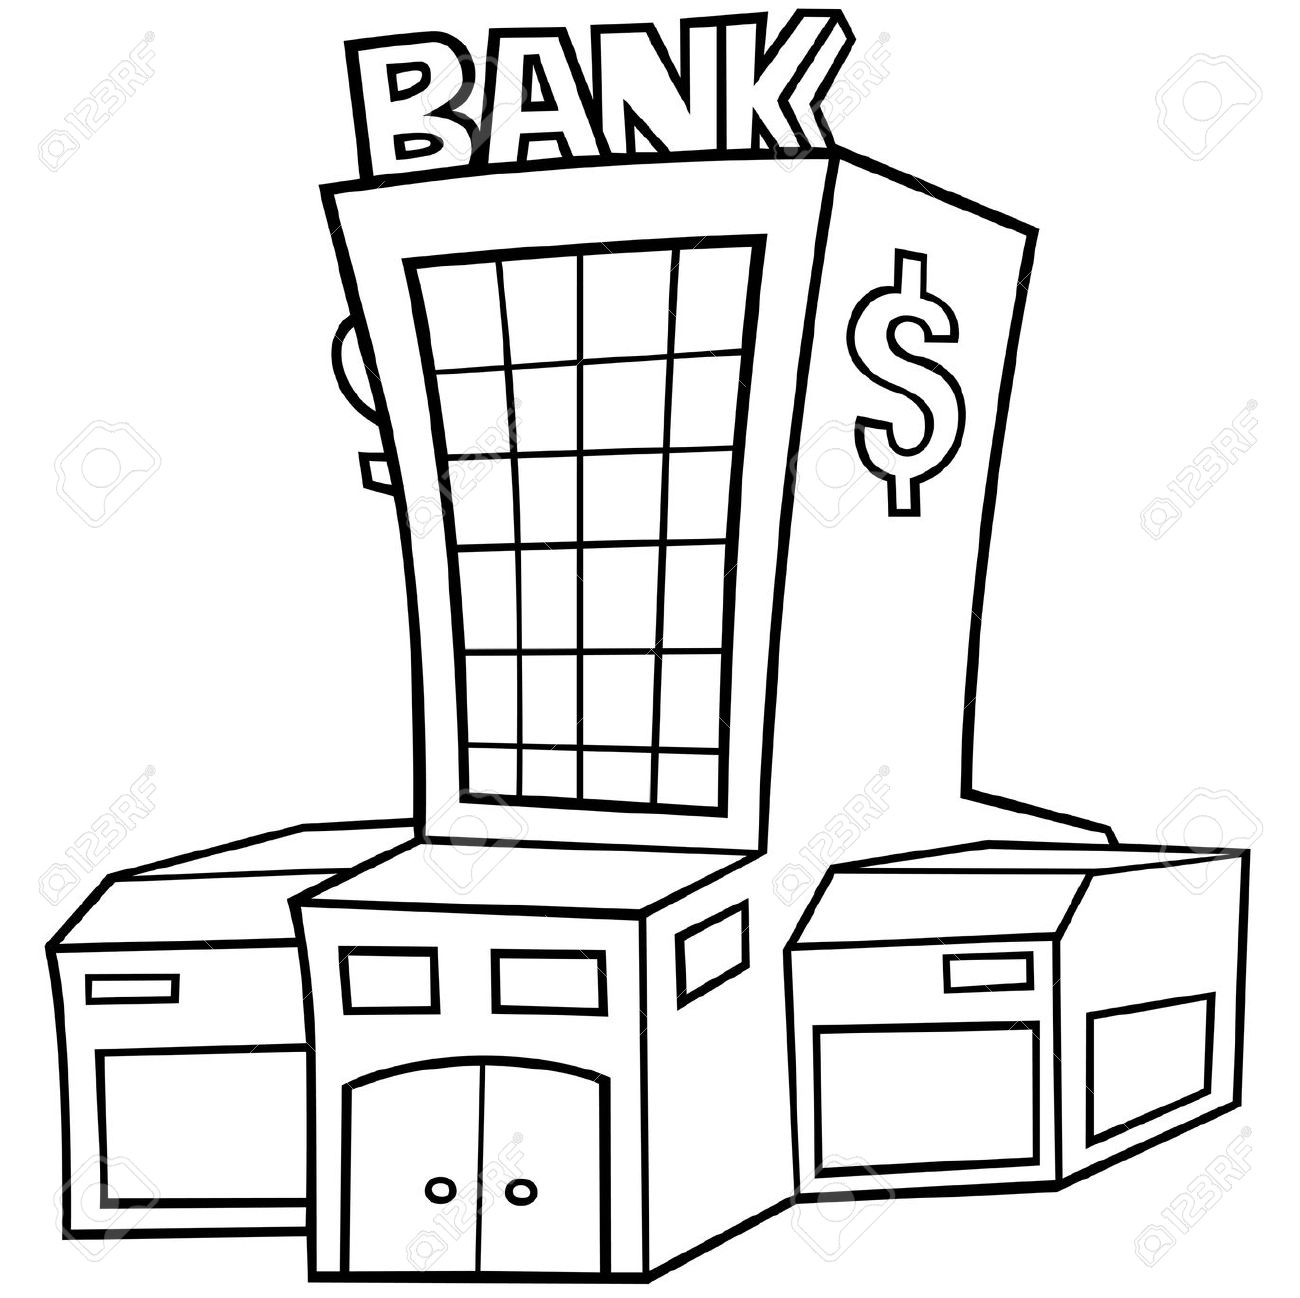 bank coloring pages piggy bank coloring pages coloring pages to download and bank pages coloring 